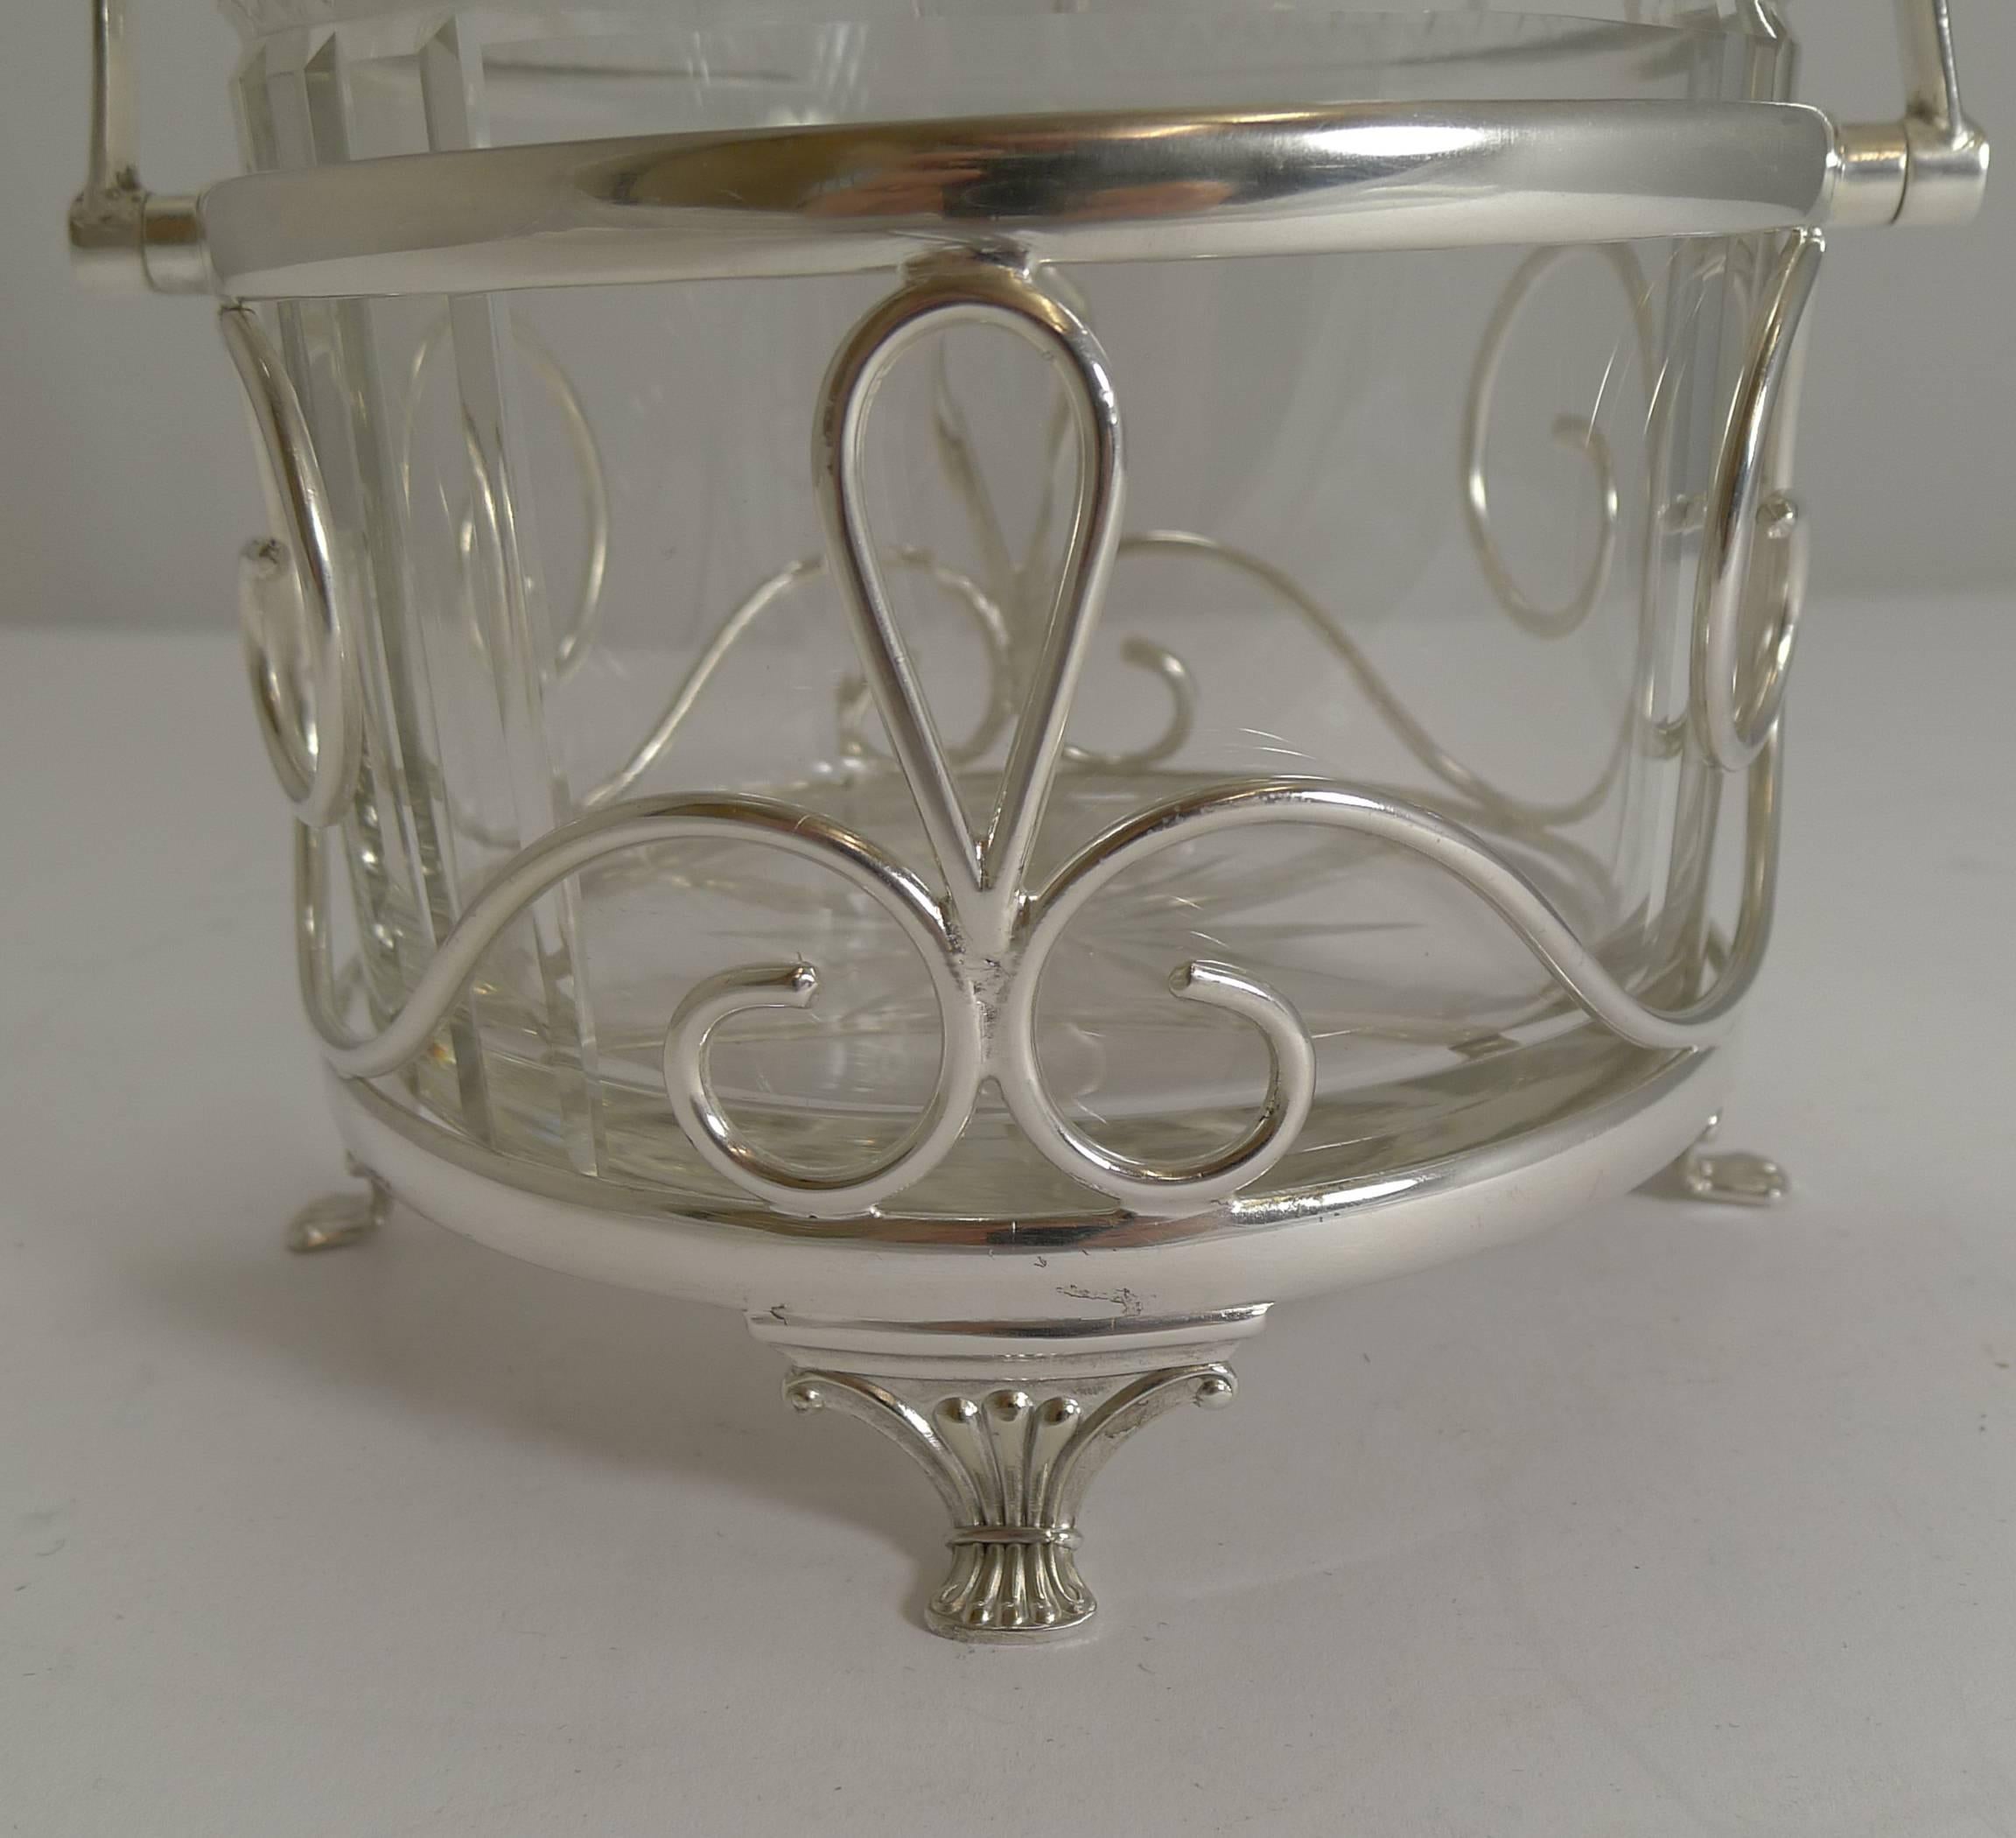 A wonderfully decorative biscuit box, the frame made from EPNS (Electro-plated nickel silver) and fully marked by the Birmingham silversmith, Arnold E Williams, it stands on four pretty feet.

The box itself is made from a hefty piece of English